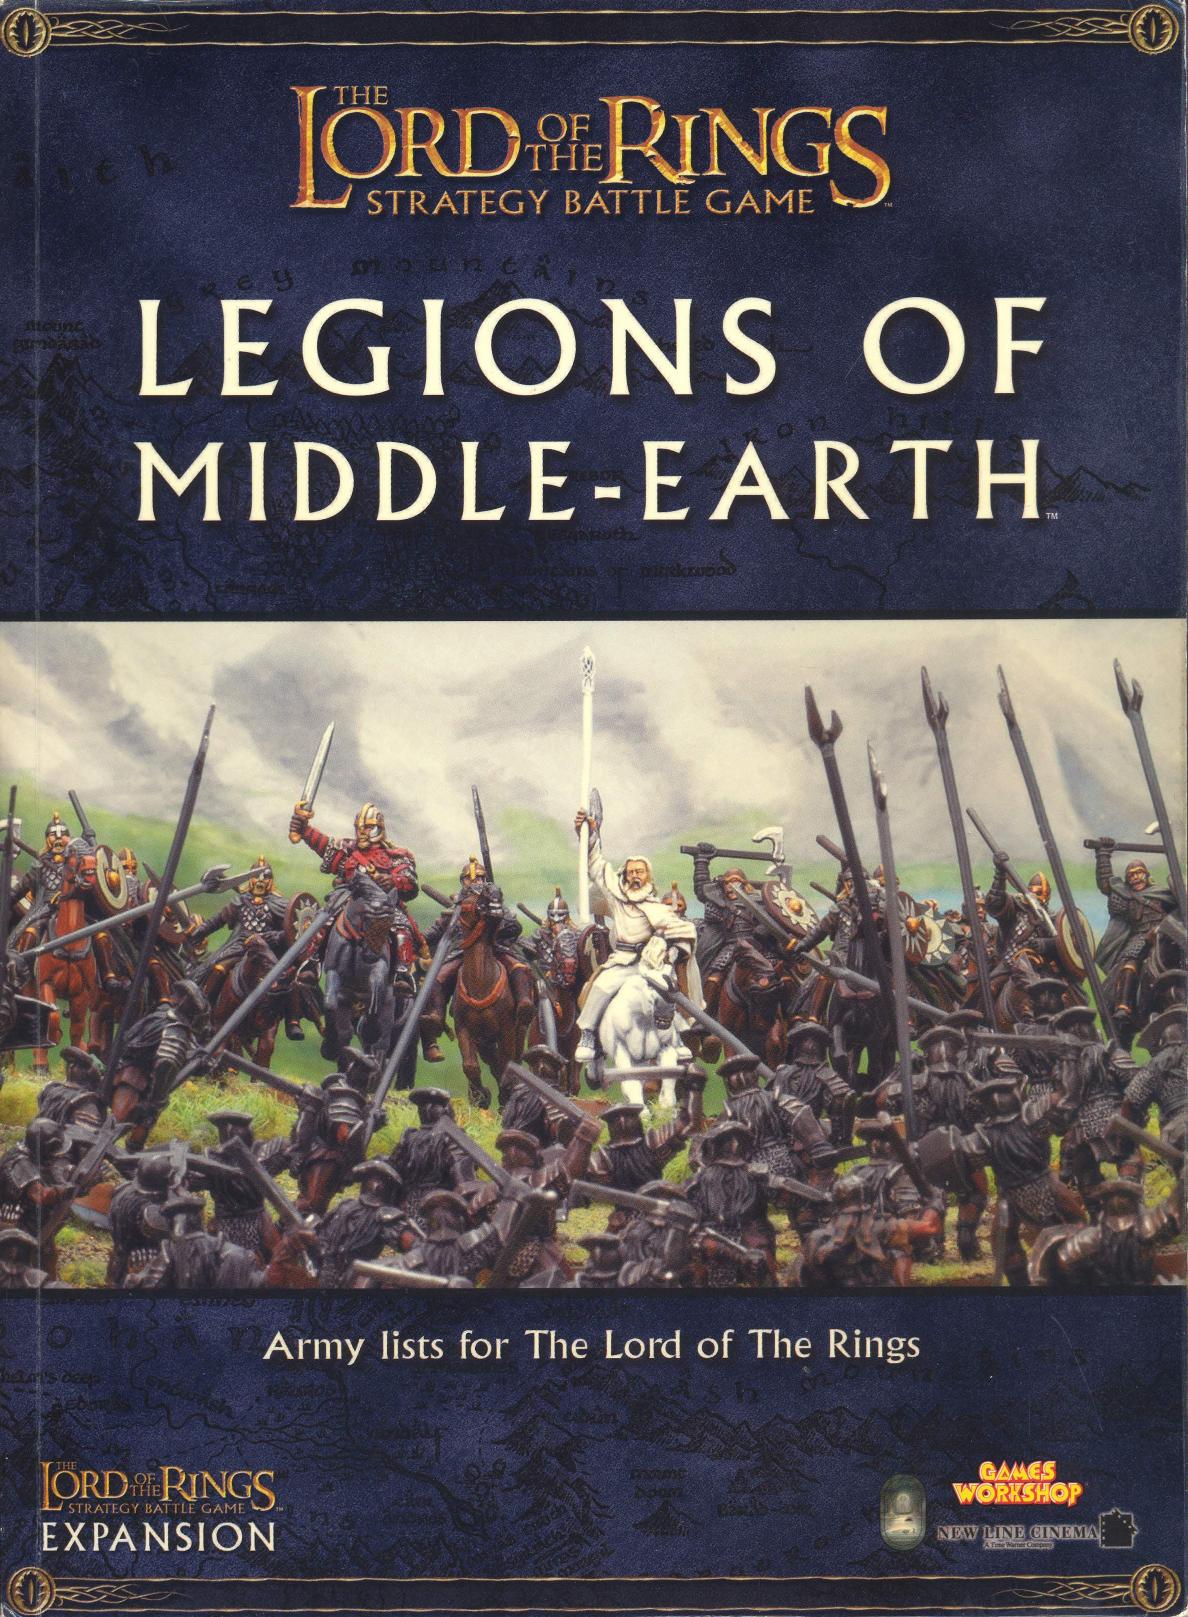 Legions of Middle-earth